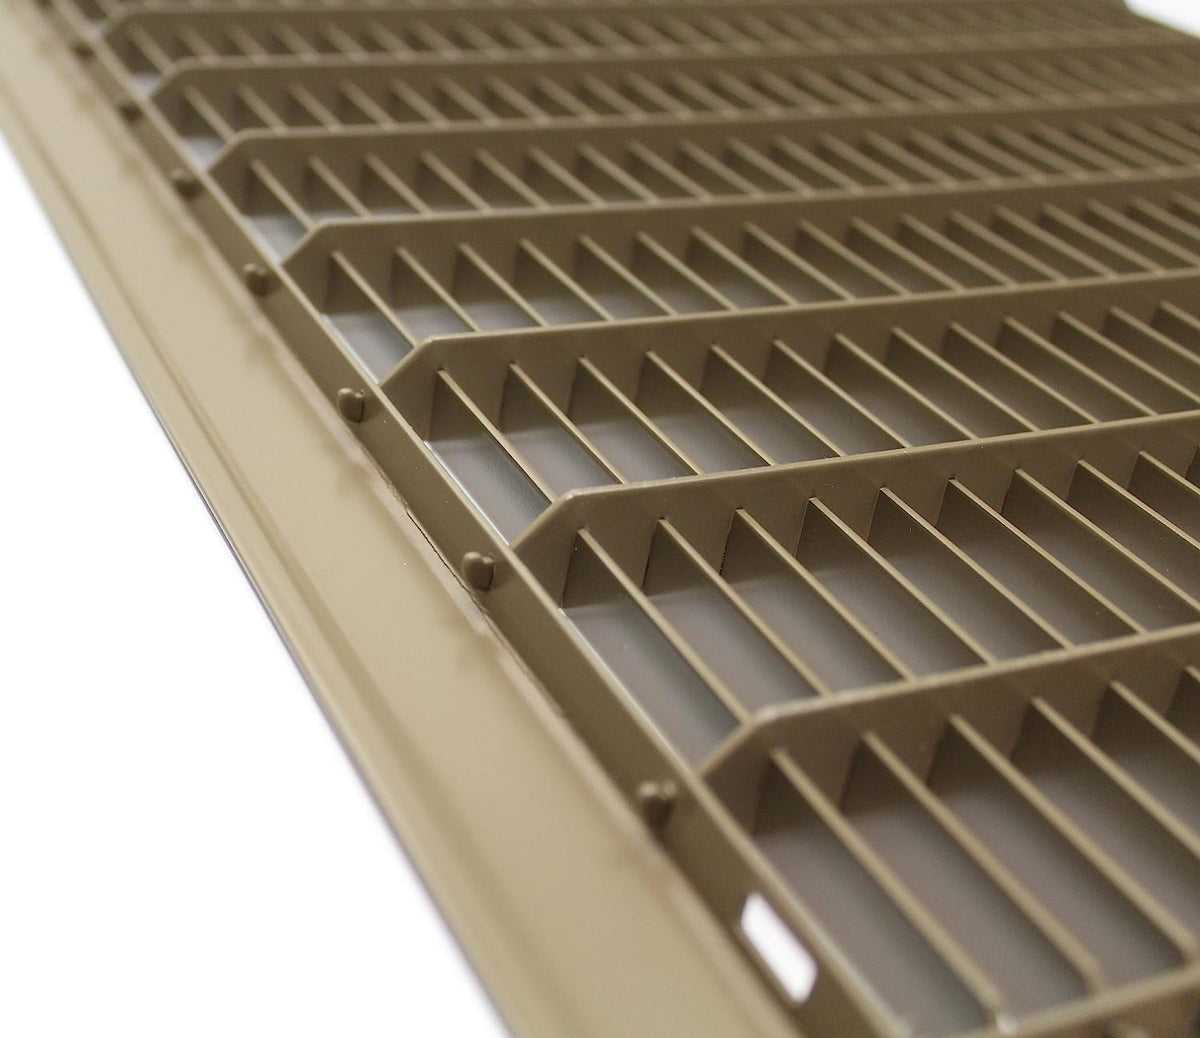 10&quot; X 24&quot; or 24&quot; X 10&quot; Heavy Duty Floor Grille - Fixed Blades Air Grille - Brown [Outer Dimensions: 11.75 X 25.75]